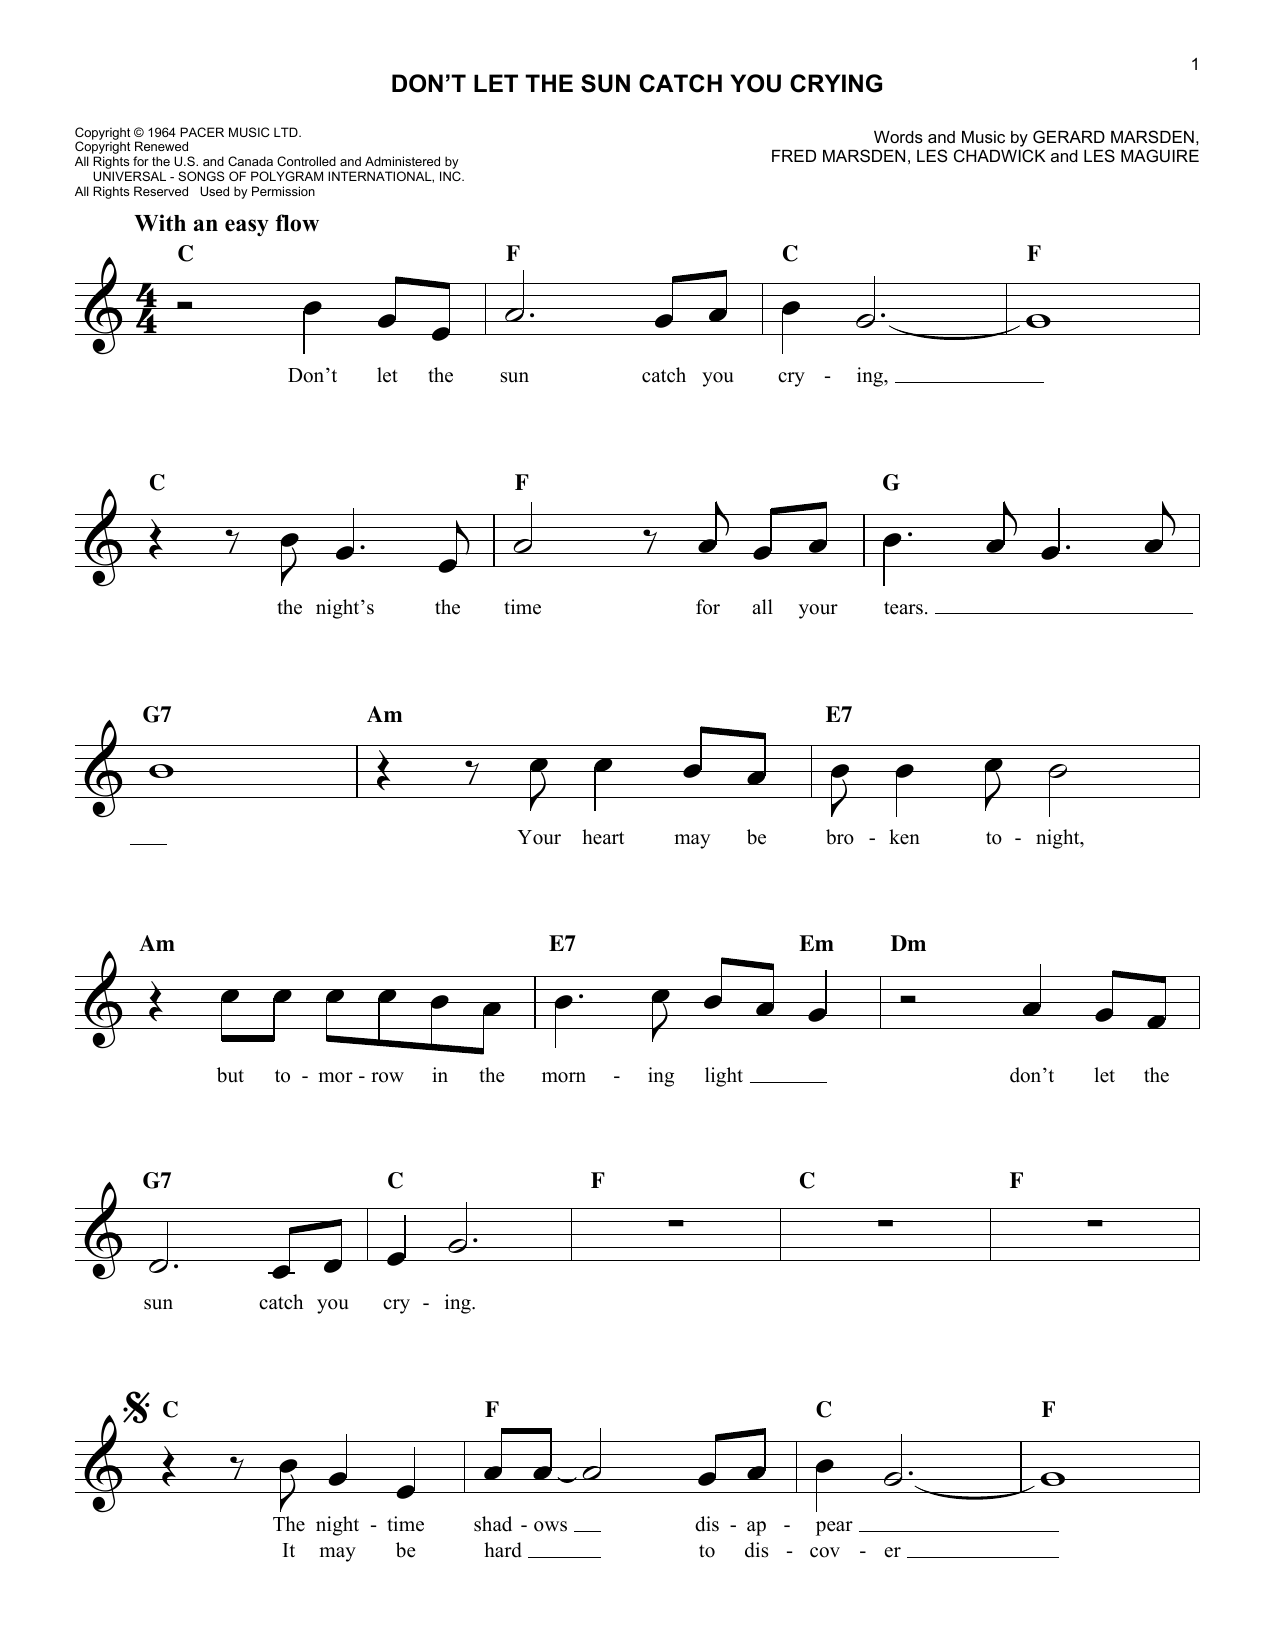 Download Gerry & The Pacemakers Don't Let The Sun Catch You Crying Sheet Music